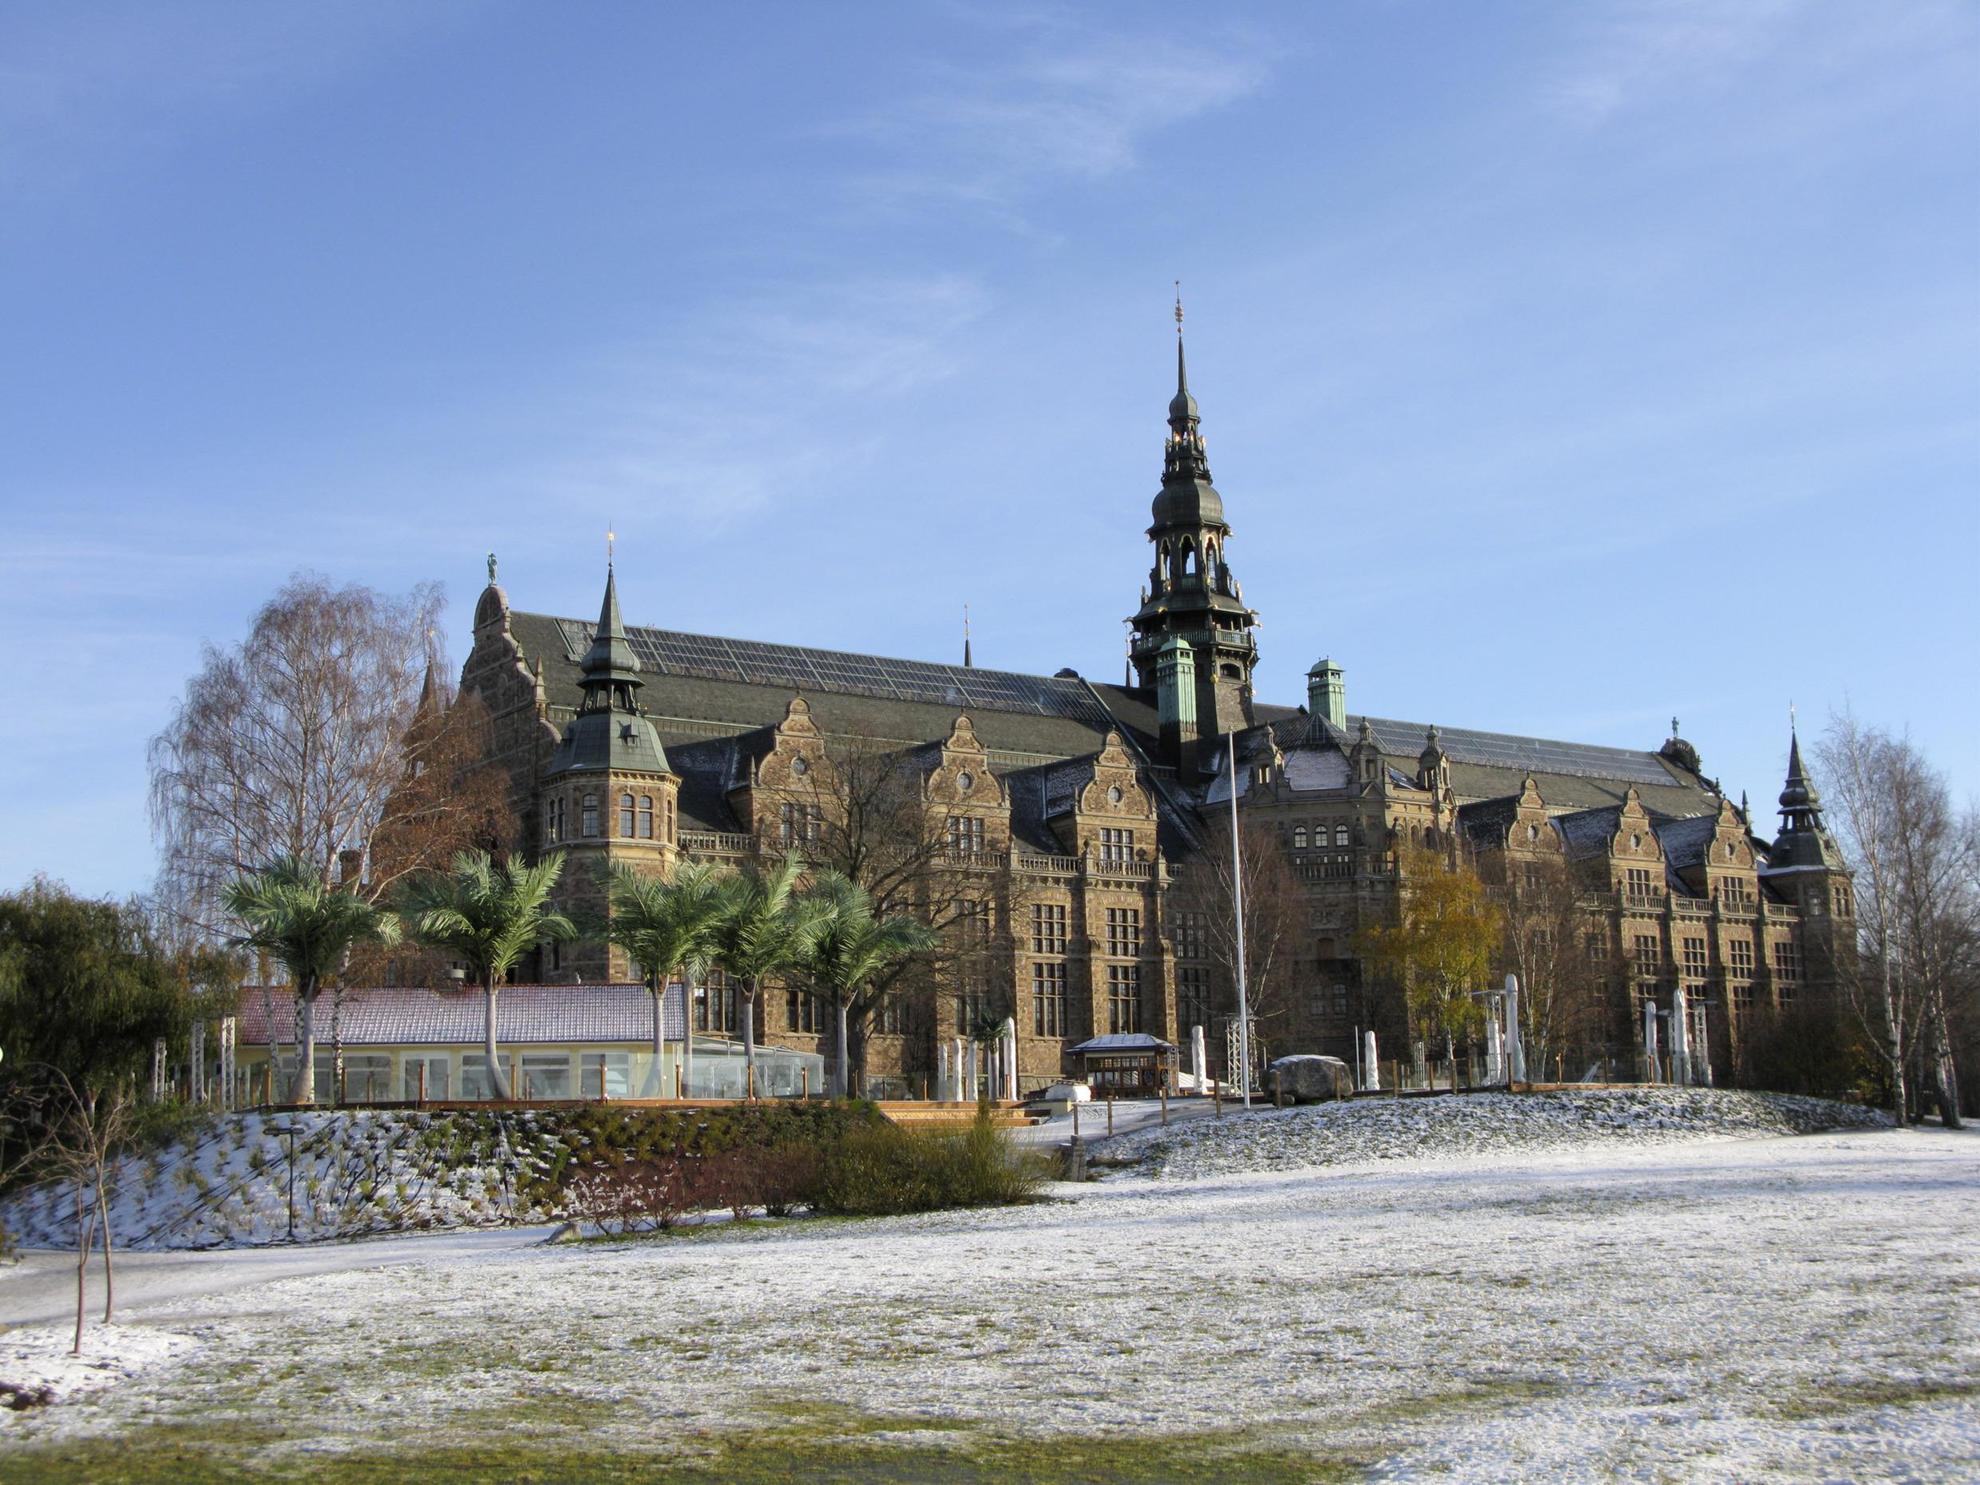 The Nordic Museum building in Djurgården, the lawn around is covered in frost.